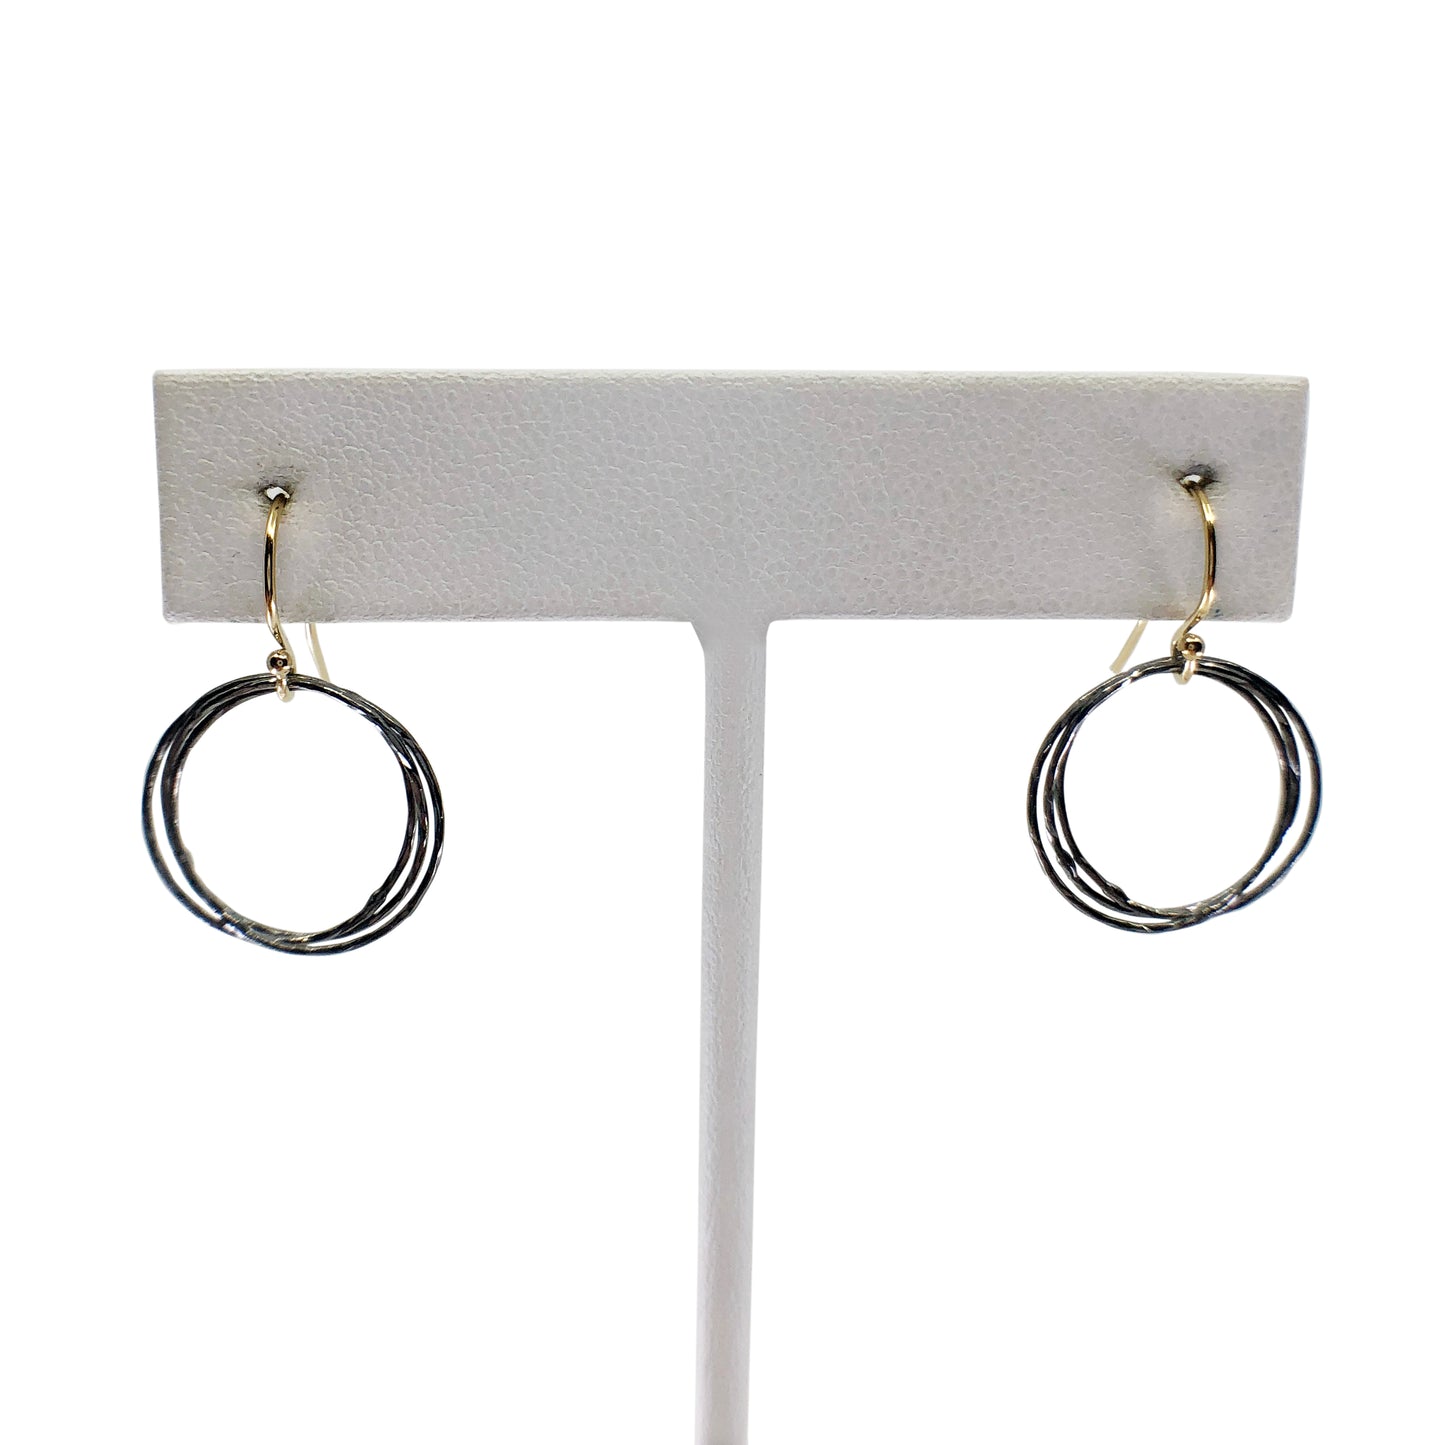 Oxidized silver and gold triple circle earrings on earring stand with white background.